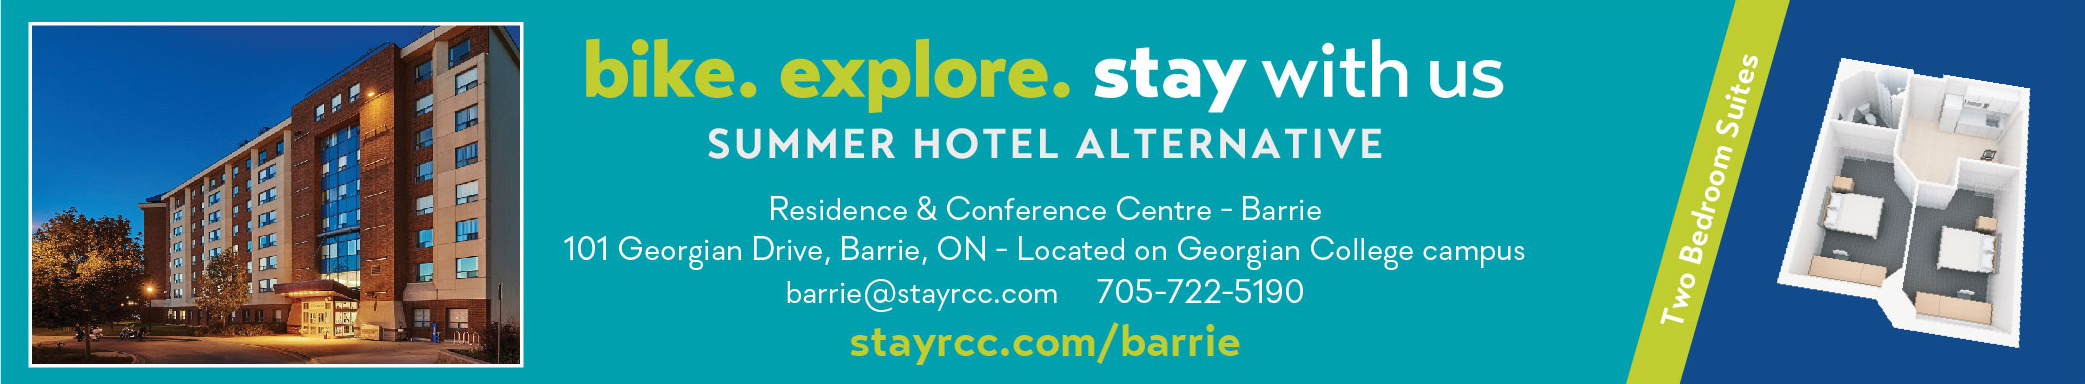 Residence and Conference Centre - Barrie 